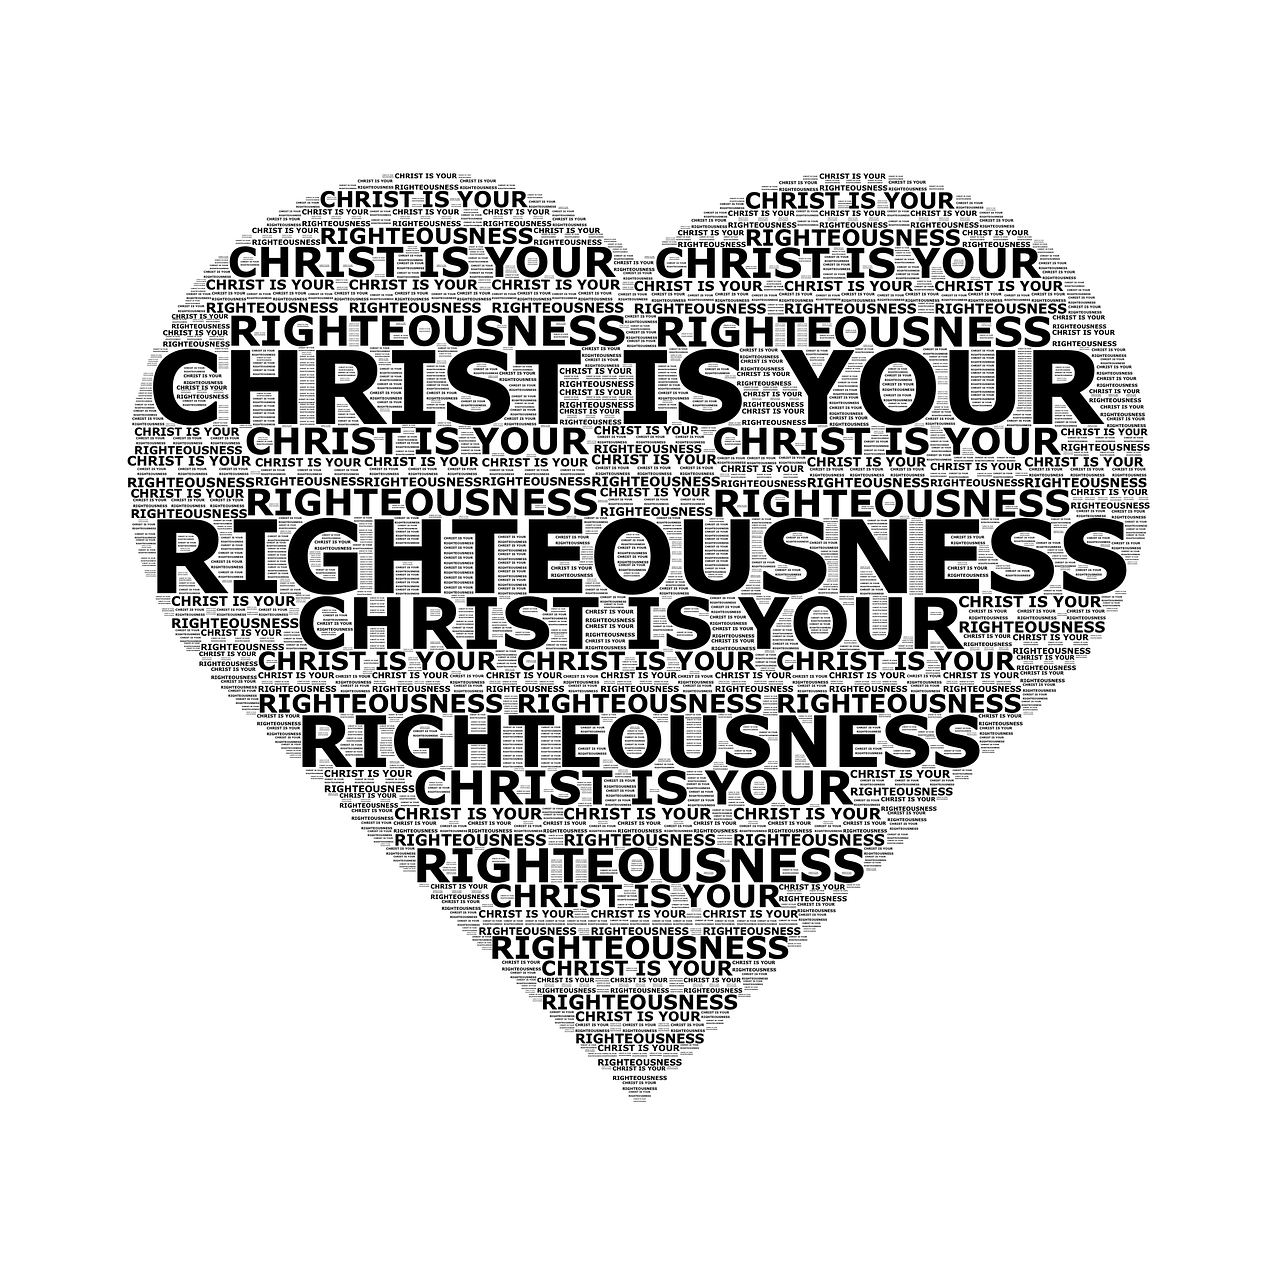 christ righteousness christian free photo